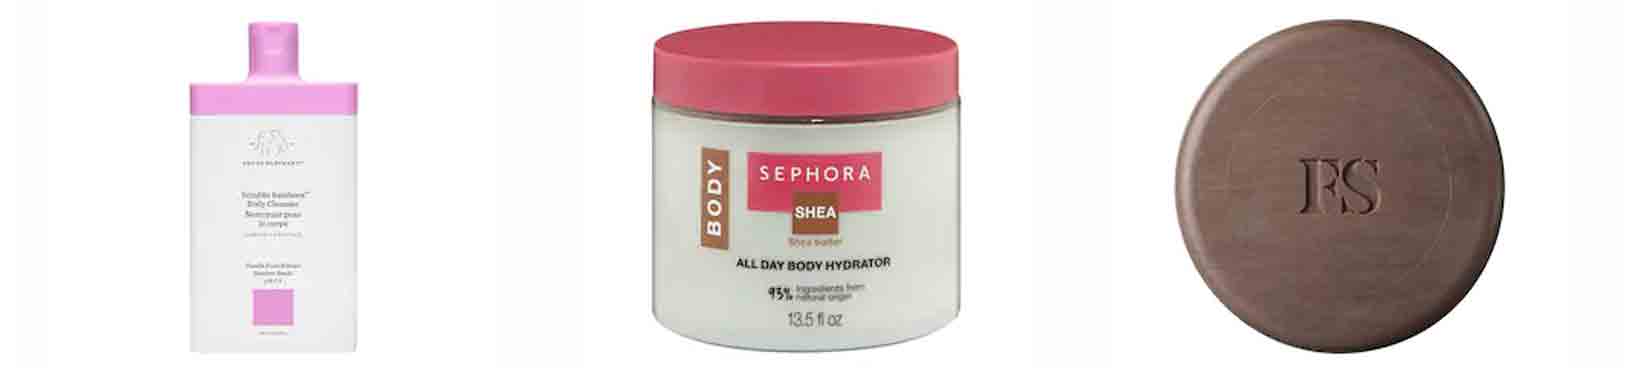 Sephora discount on selfcare products